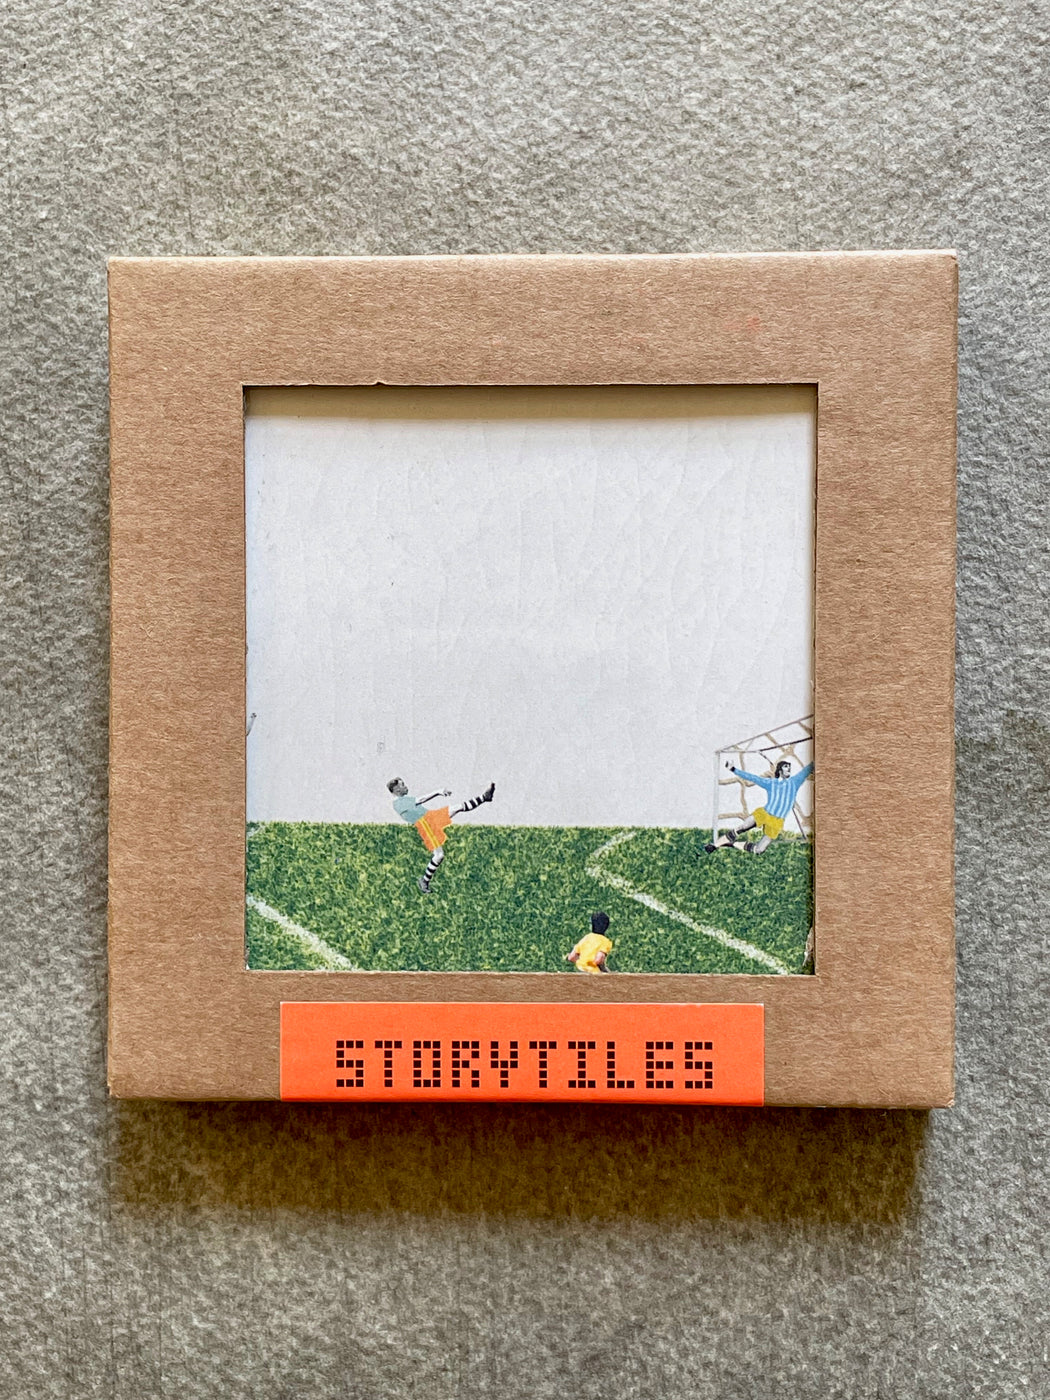 "We Are The Champions" Story Tile by Marga Van Oers